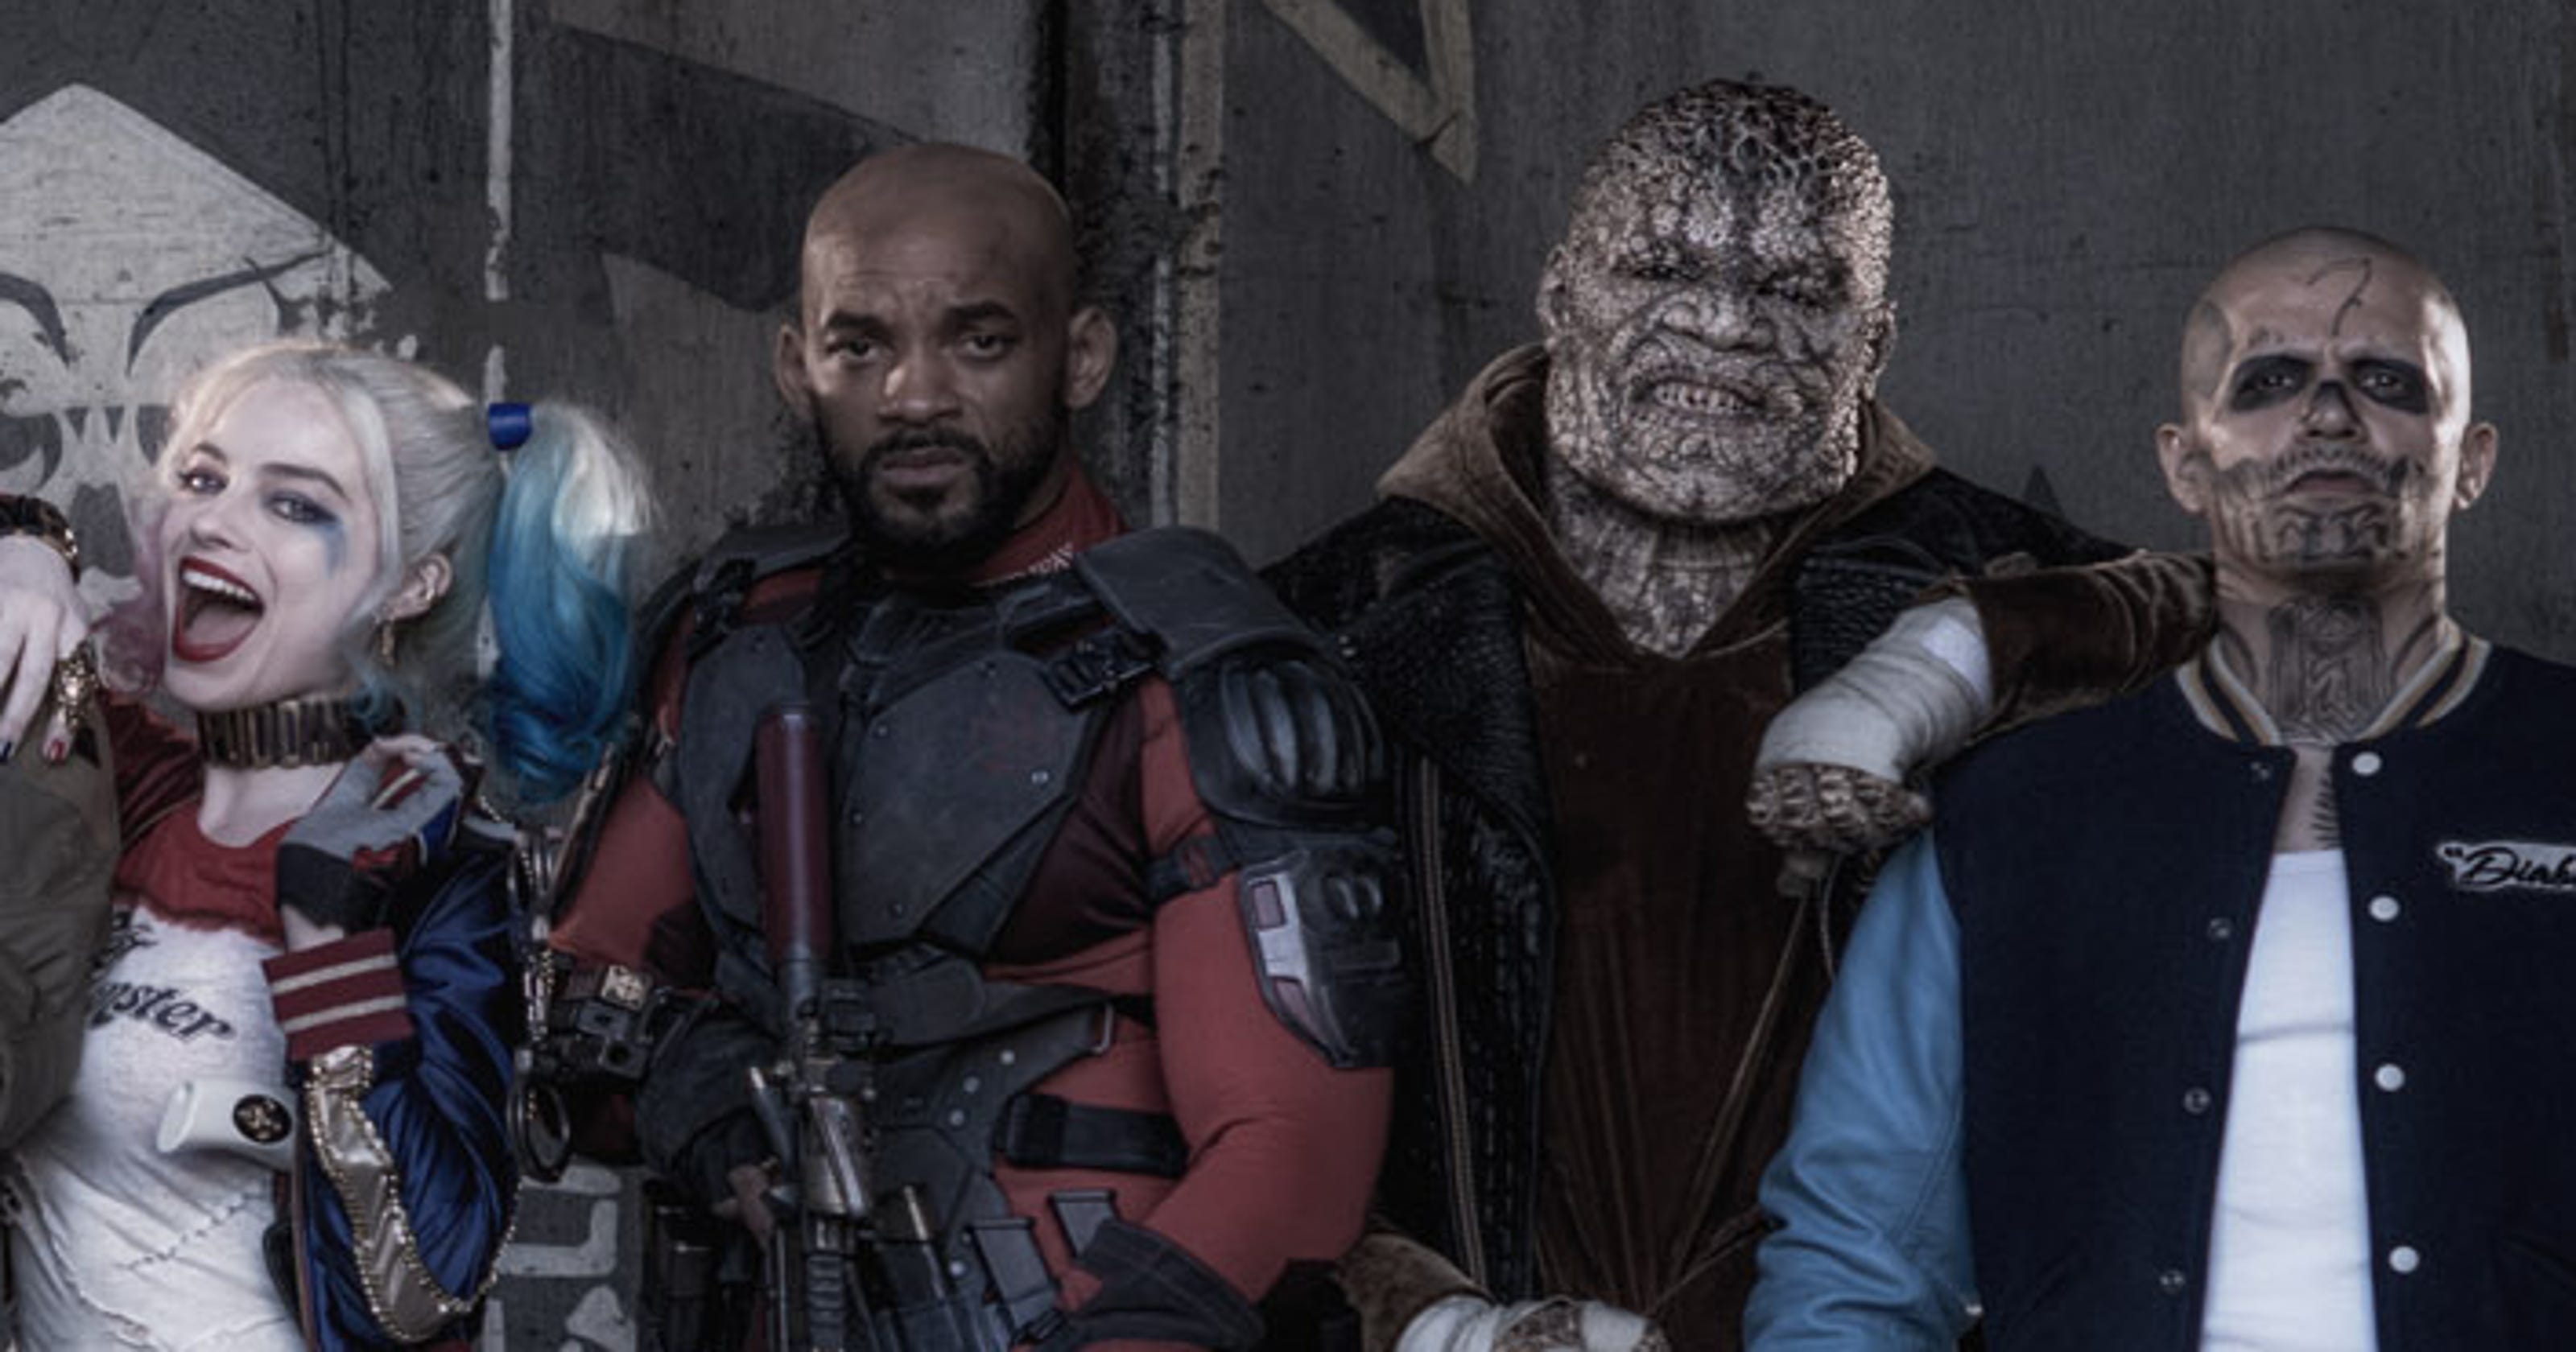 Will Smith And Margot Robbie Are Gleefully Bad In New Suicide Squad Pics